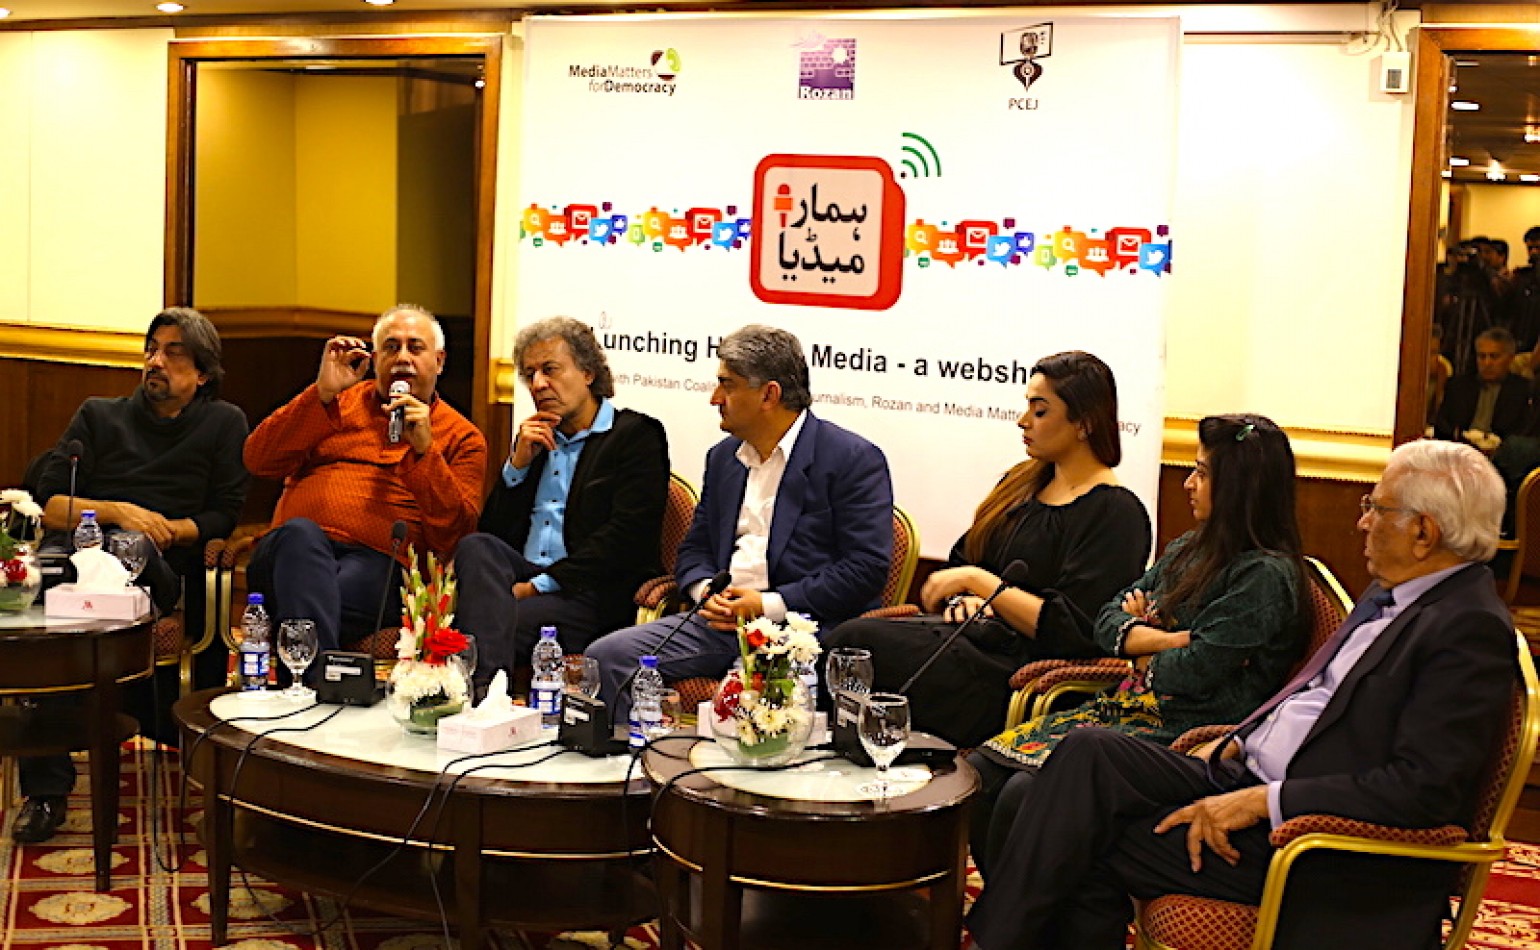 Media Matters for Democracy, Rozan and Pakistan Coalition for Ethical Journalism mark the launch of ‘Humara Media’ as a social media watchdog on mainstream media